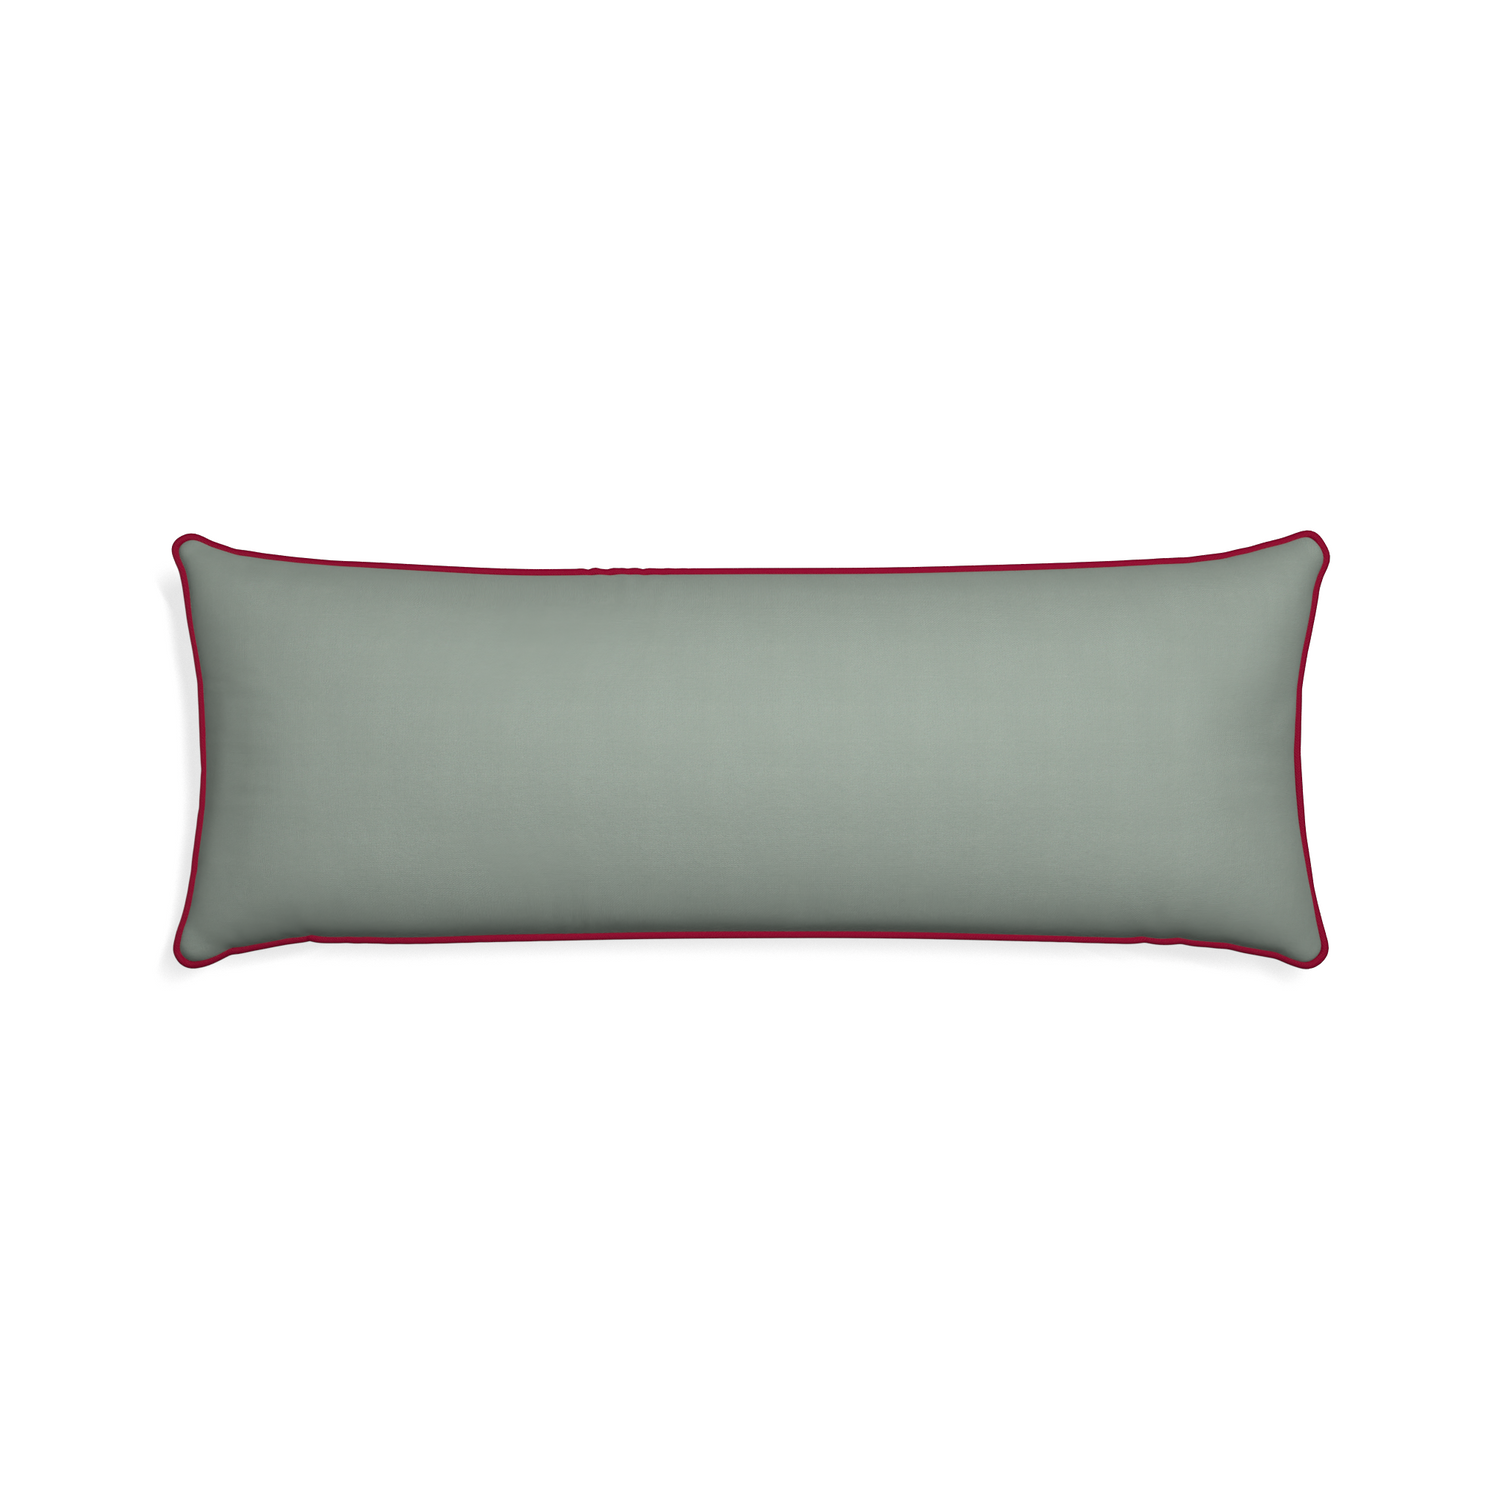 Xl-lumbar sage custom pillow with raspberry piping on white background